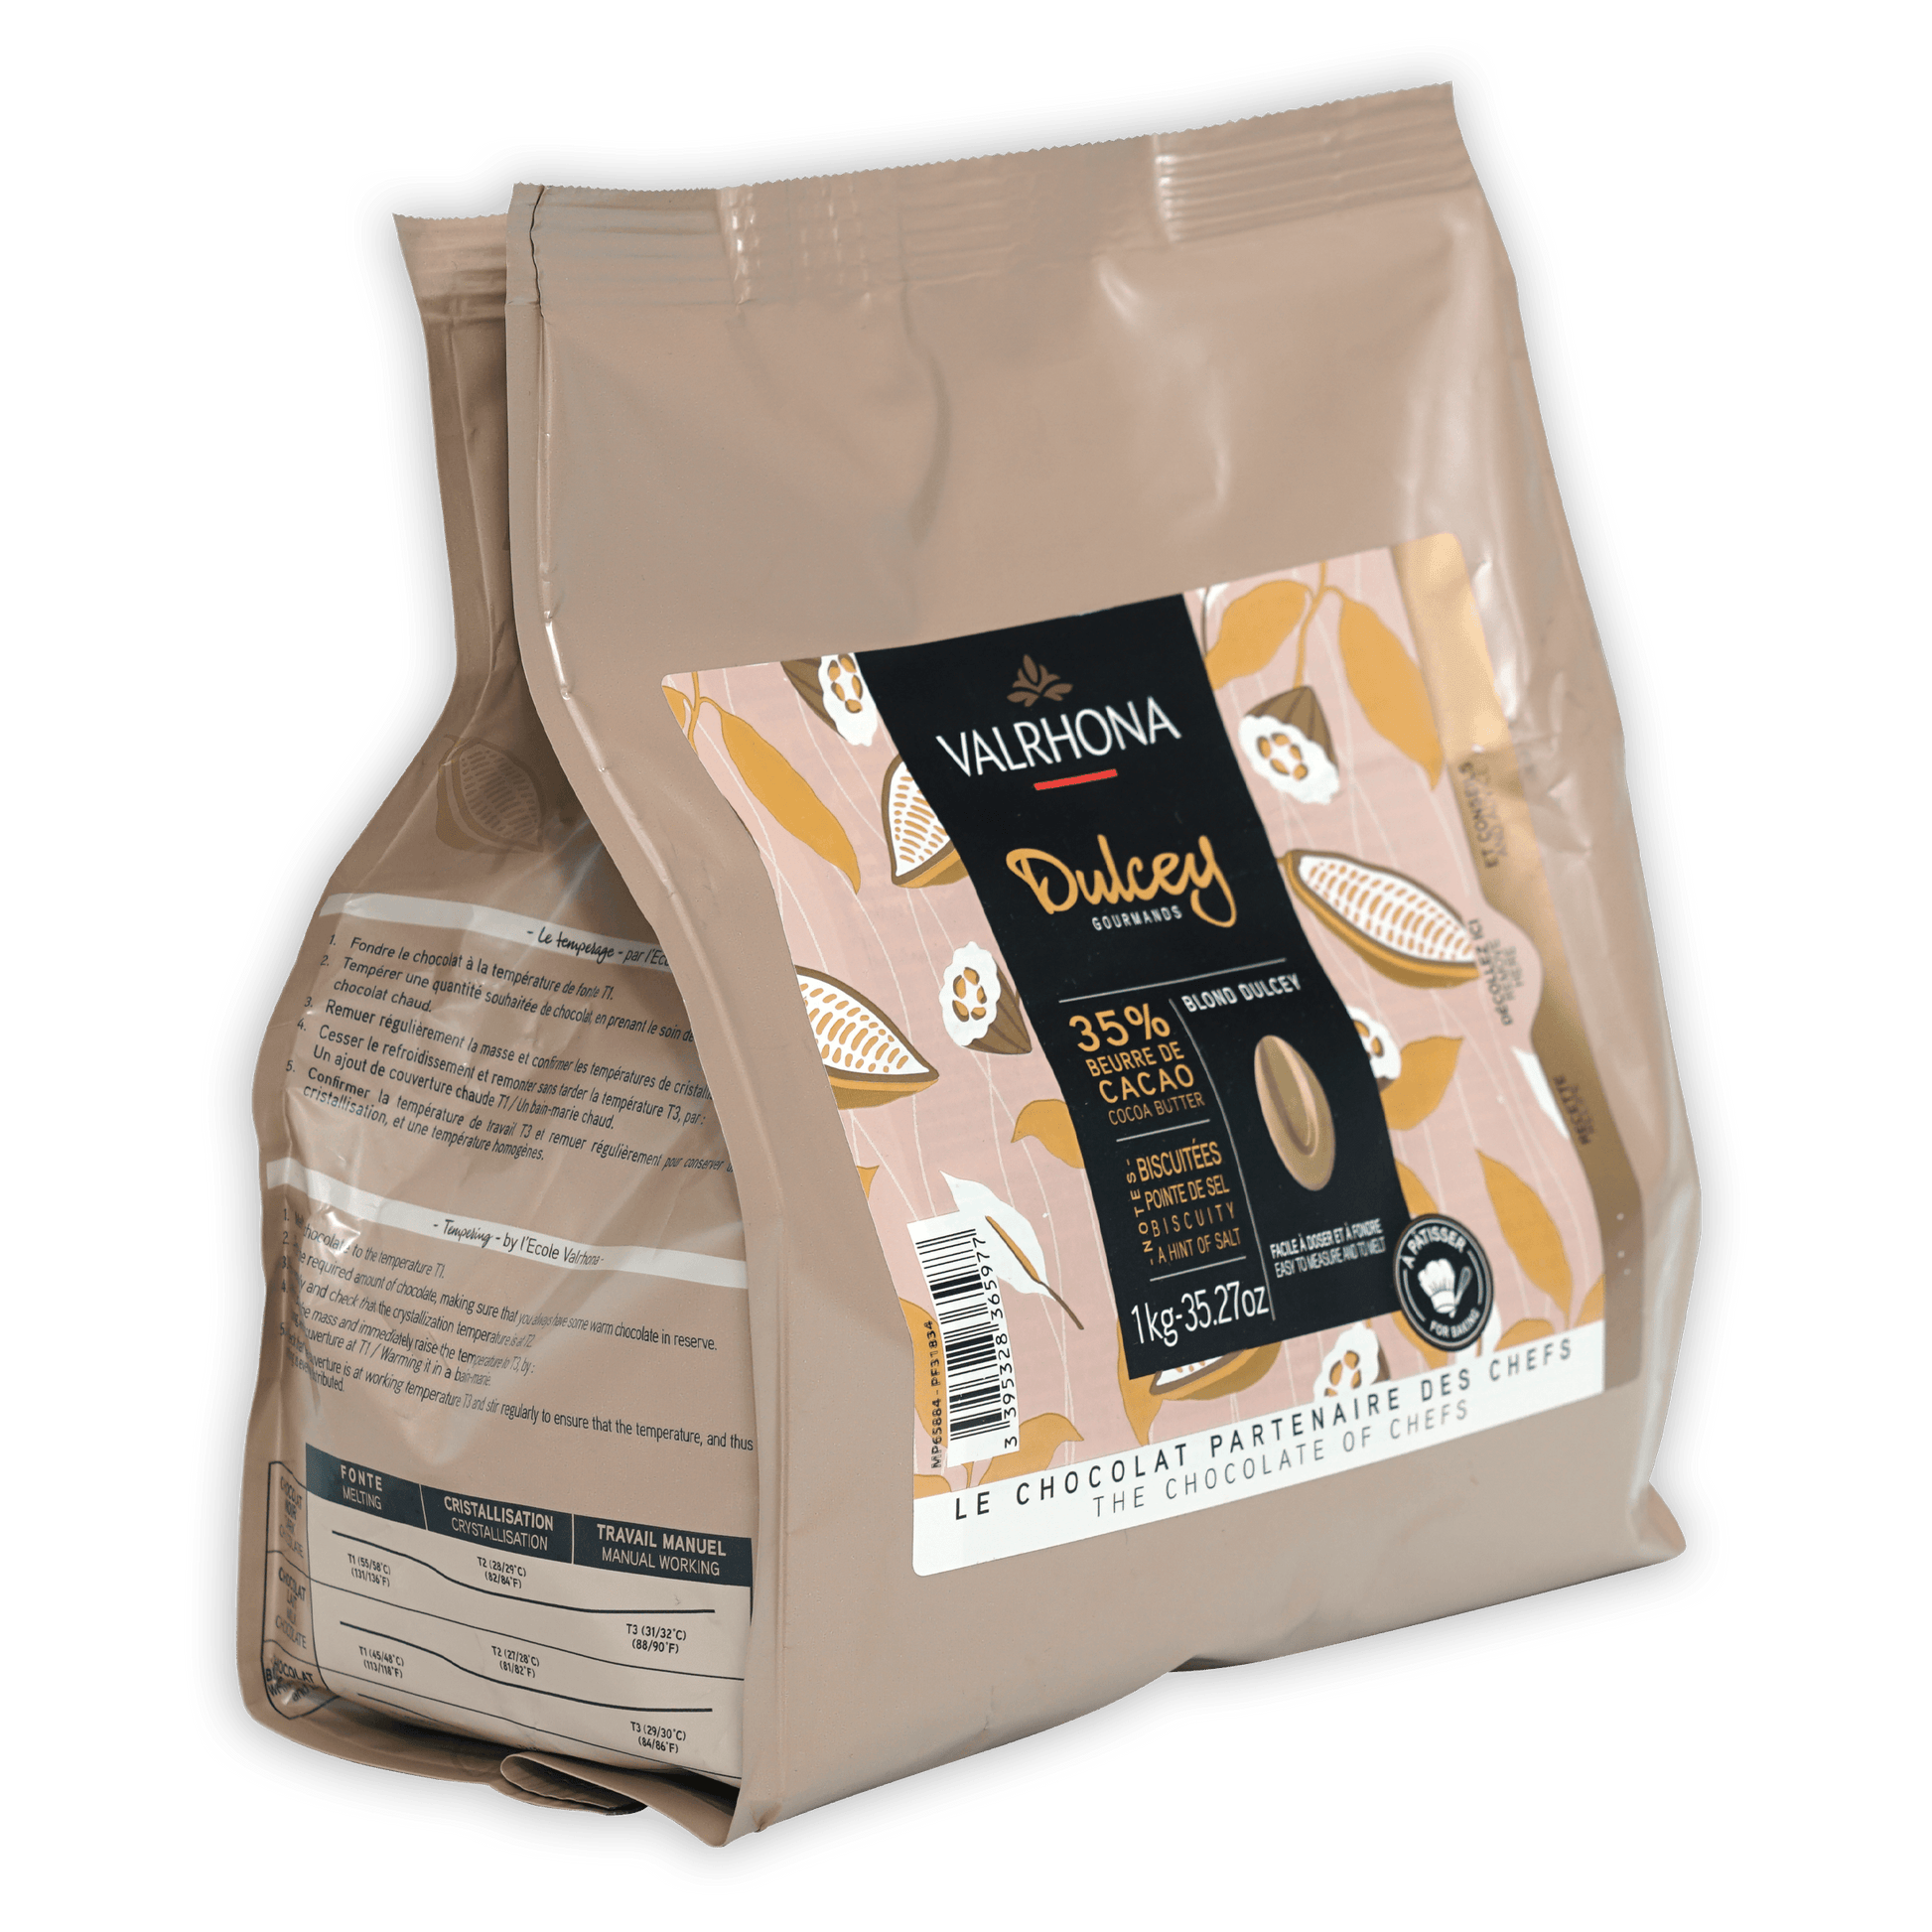 Buy Valrhona Dulcey Blond Chocolate Feve from OliveNation - 1